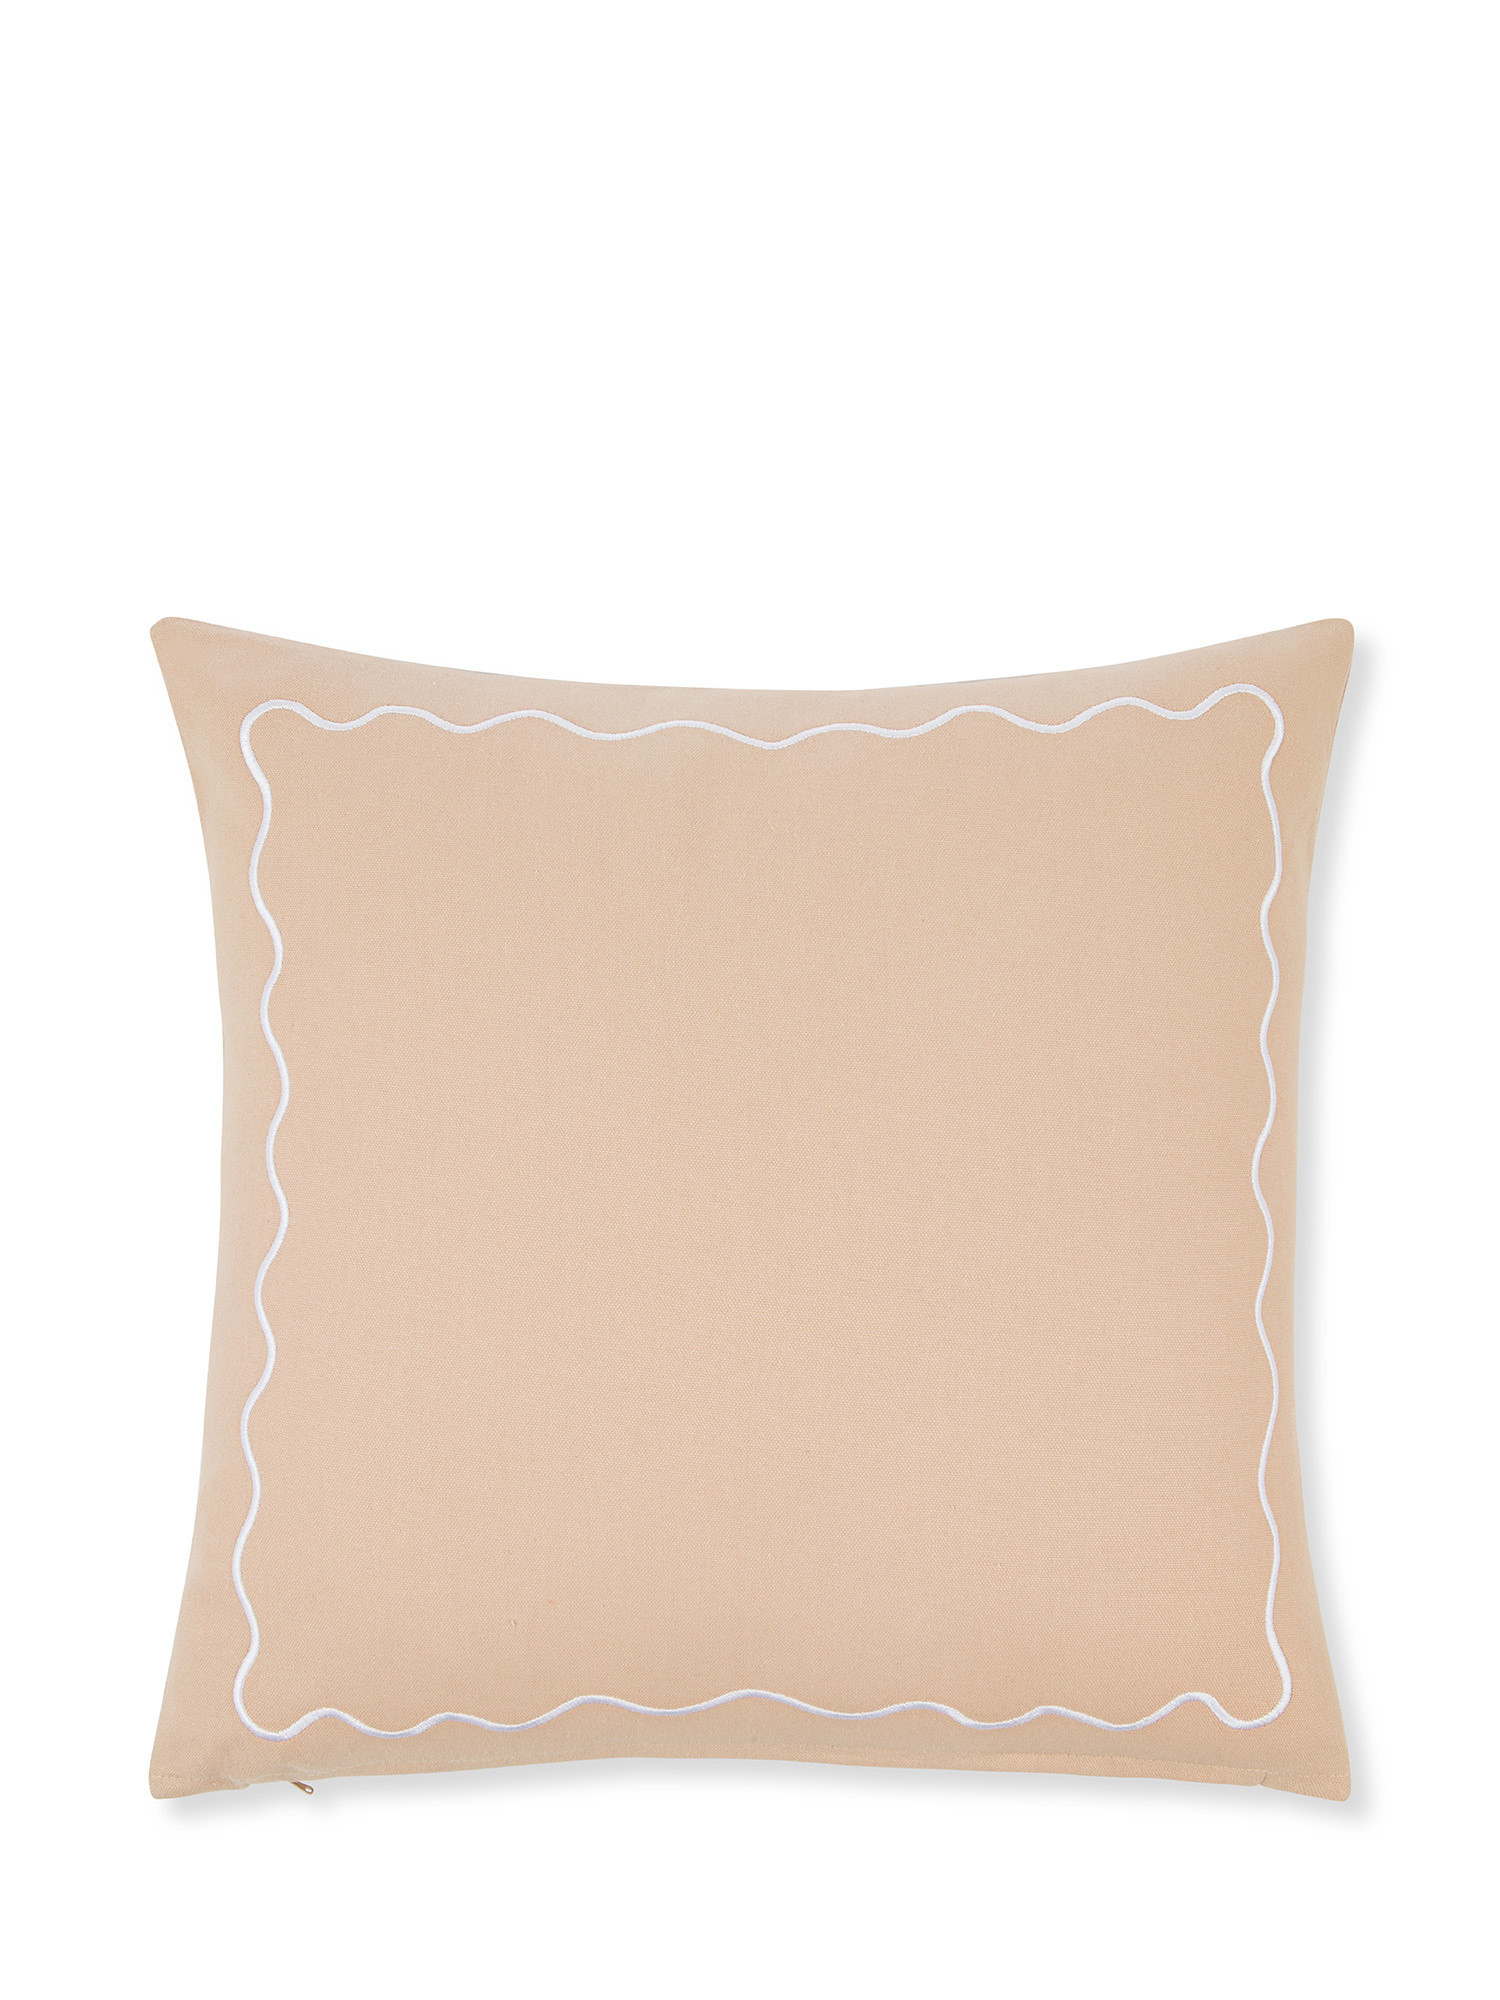 Cotton cushion with embroidered frame 45x45cm, Light Beige, large image number 0